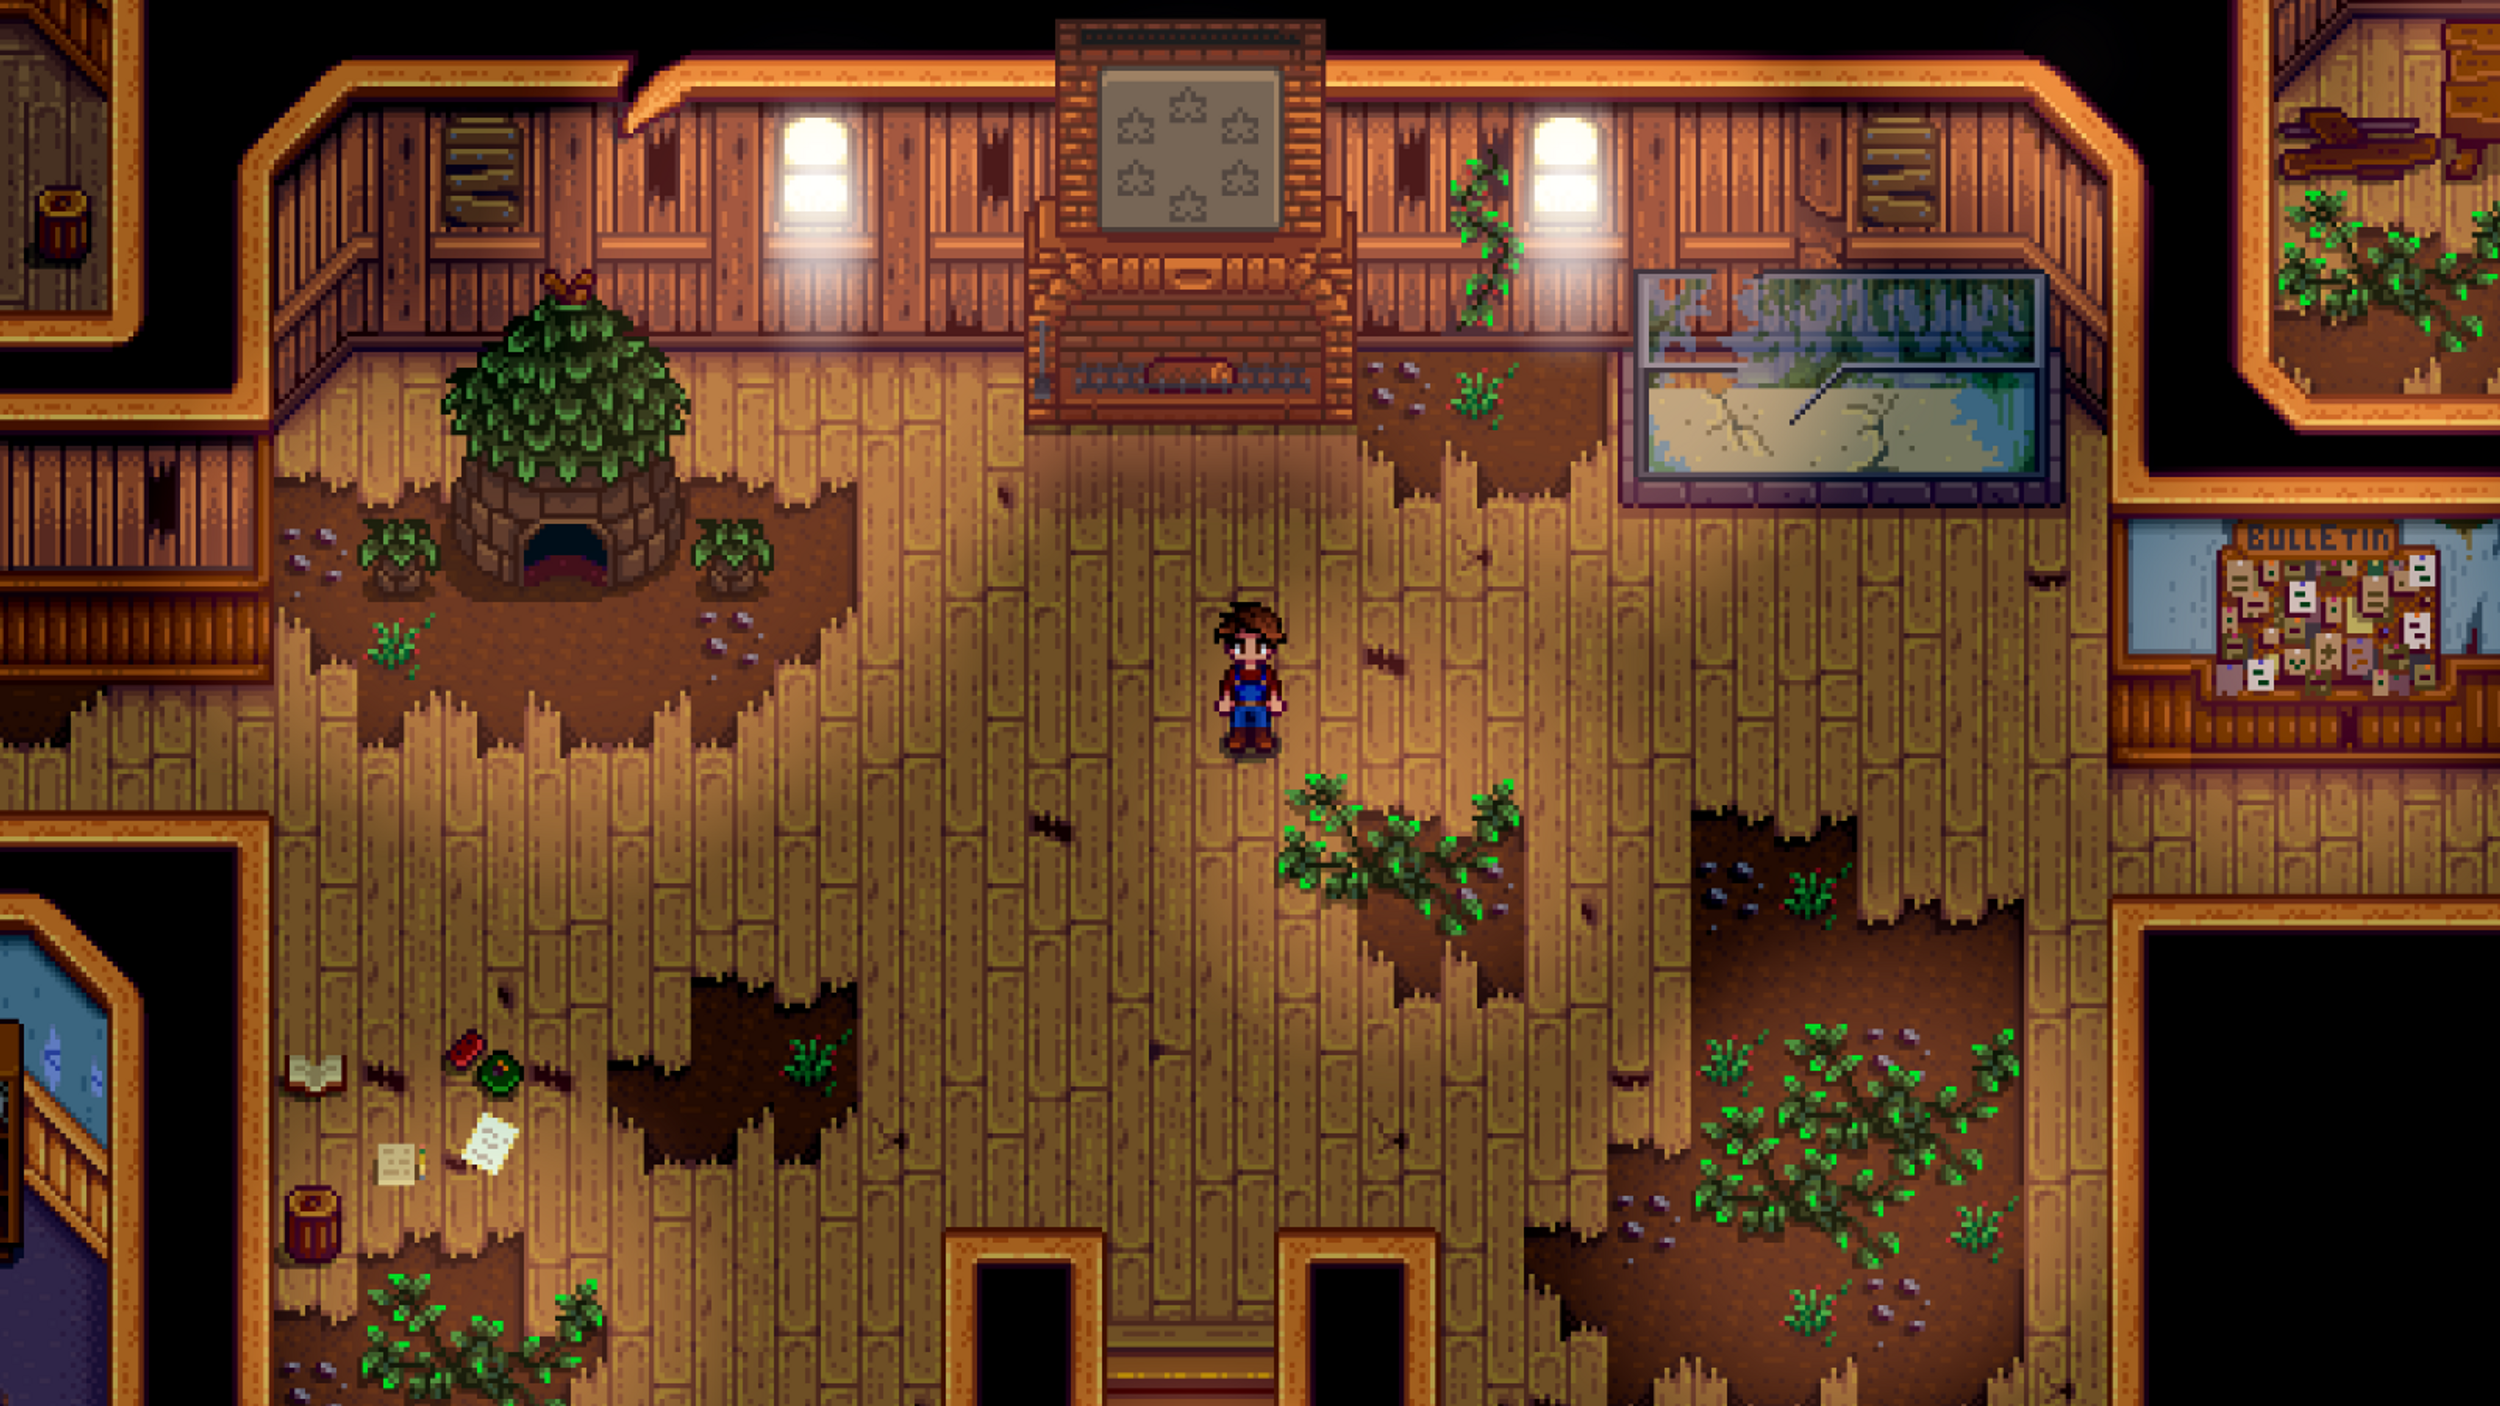 4] Valley - Stardew [PlayStation PS-4